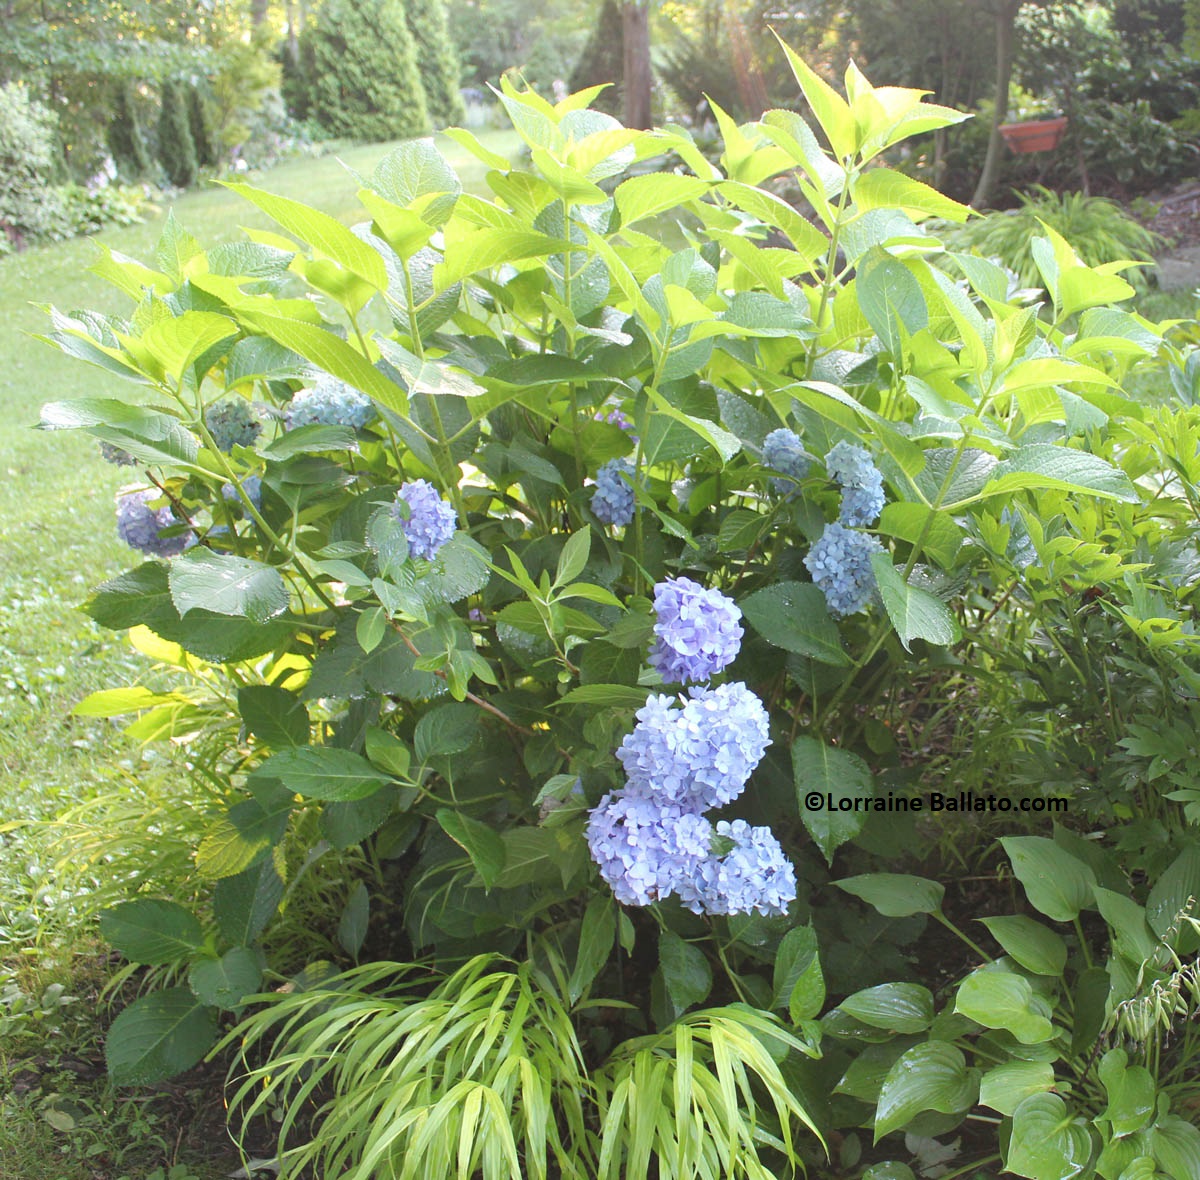 Hydrangea care in July can include cutting some stems in mid-season